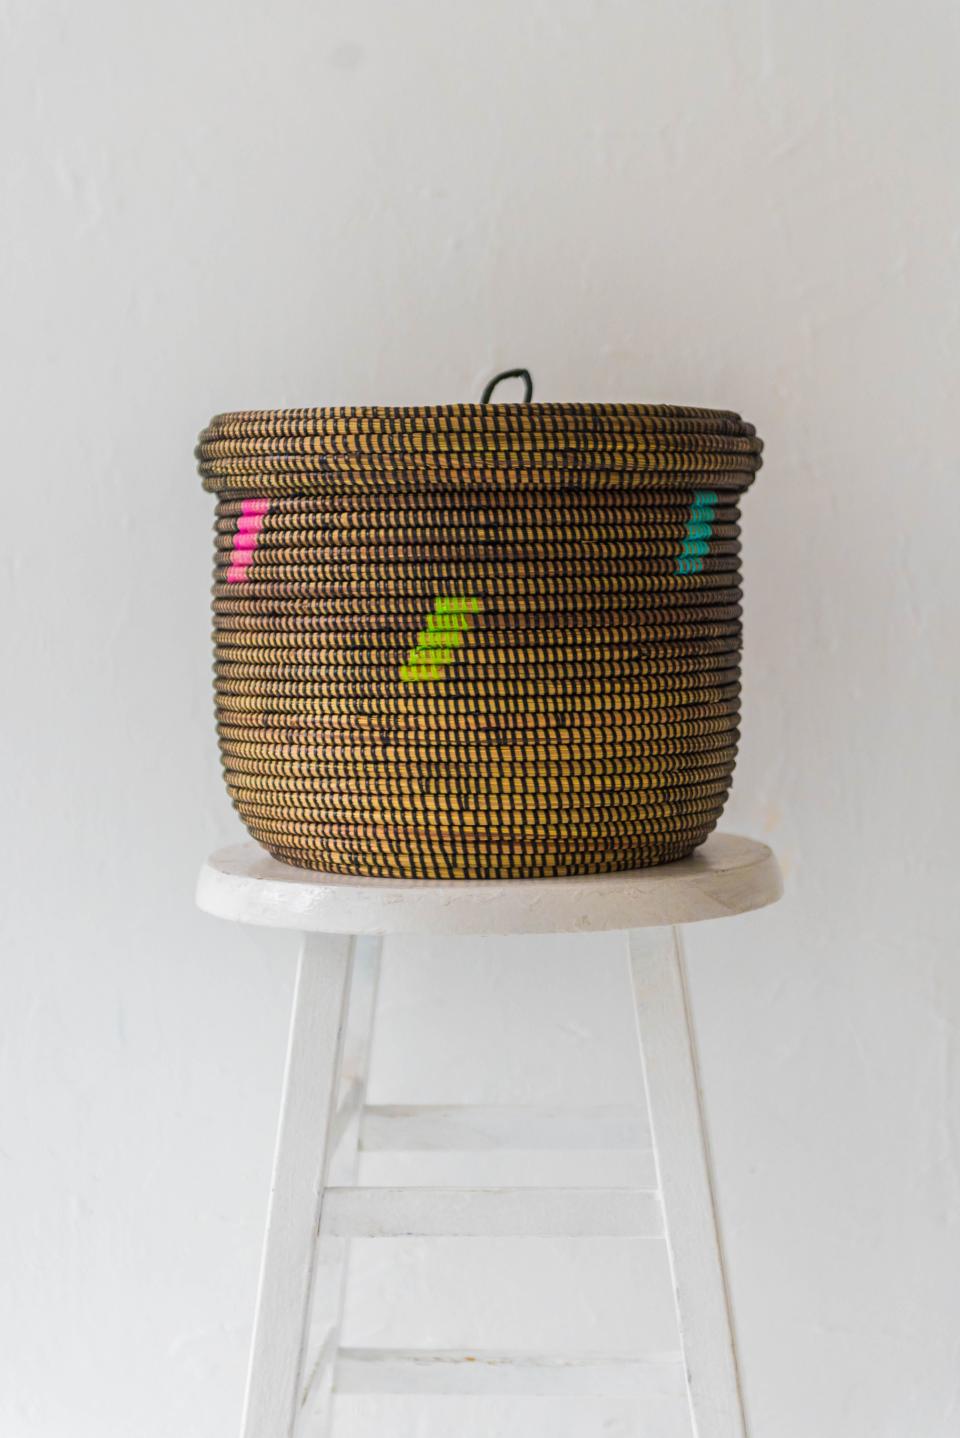 Westchester Craft Crawl will feature work from Hudson Valley makers including works from Senegal's Tackassanu.